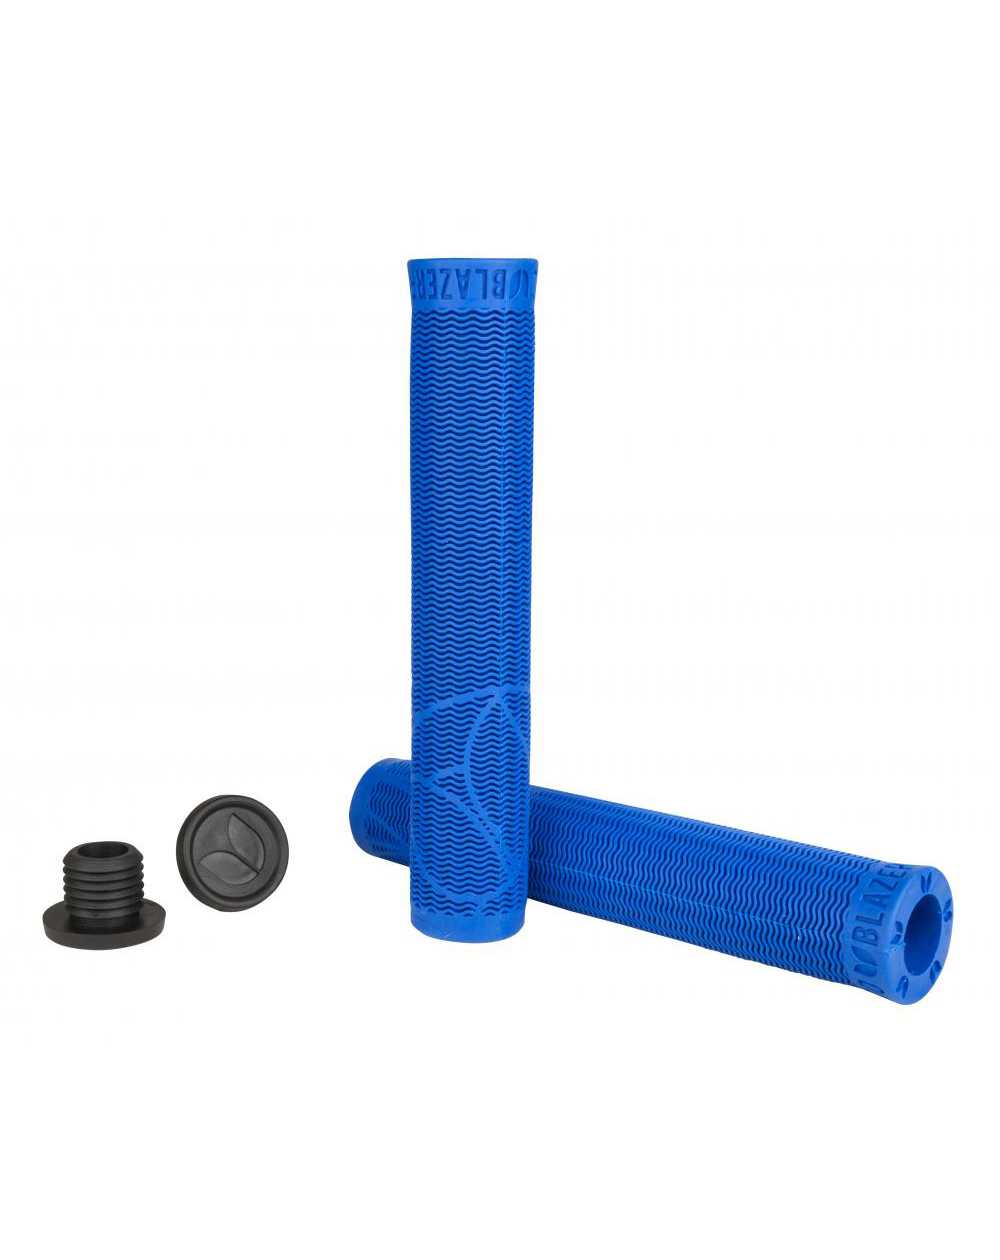 Blazer Pro Calibre Stunt Scooter Grips Blue pack of 2